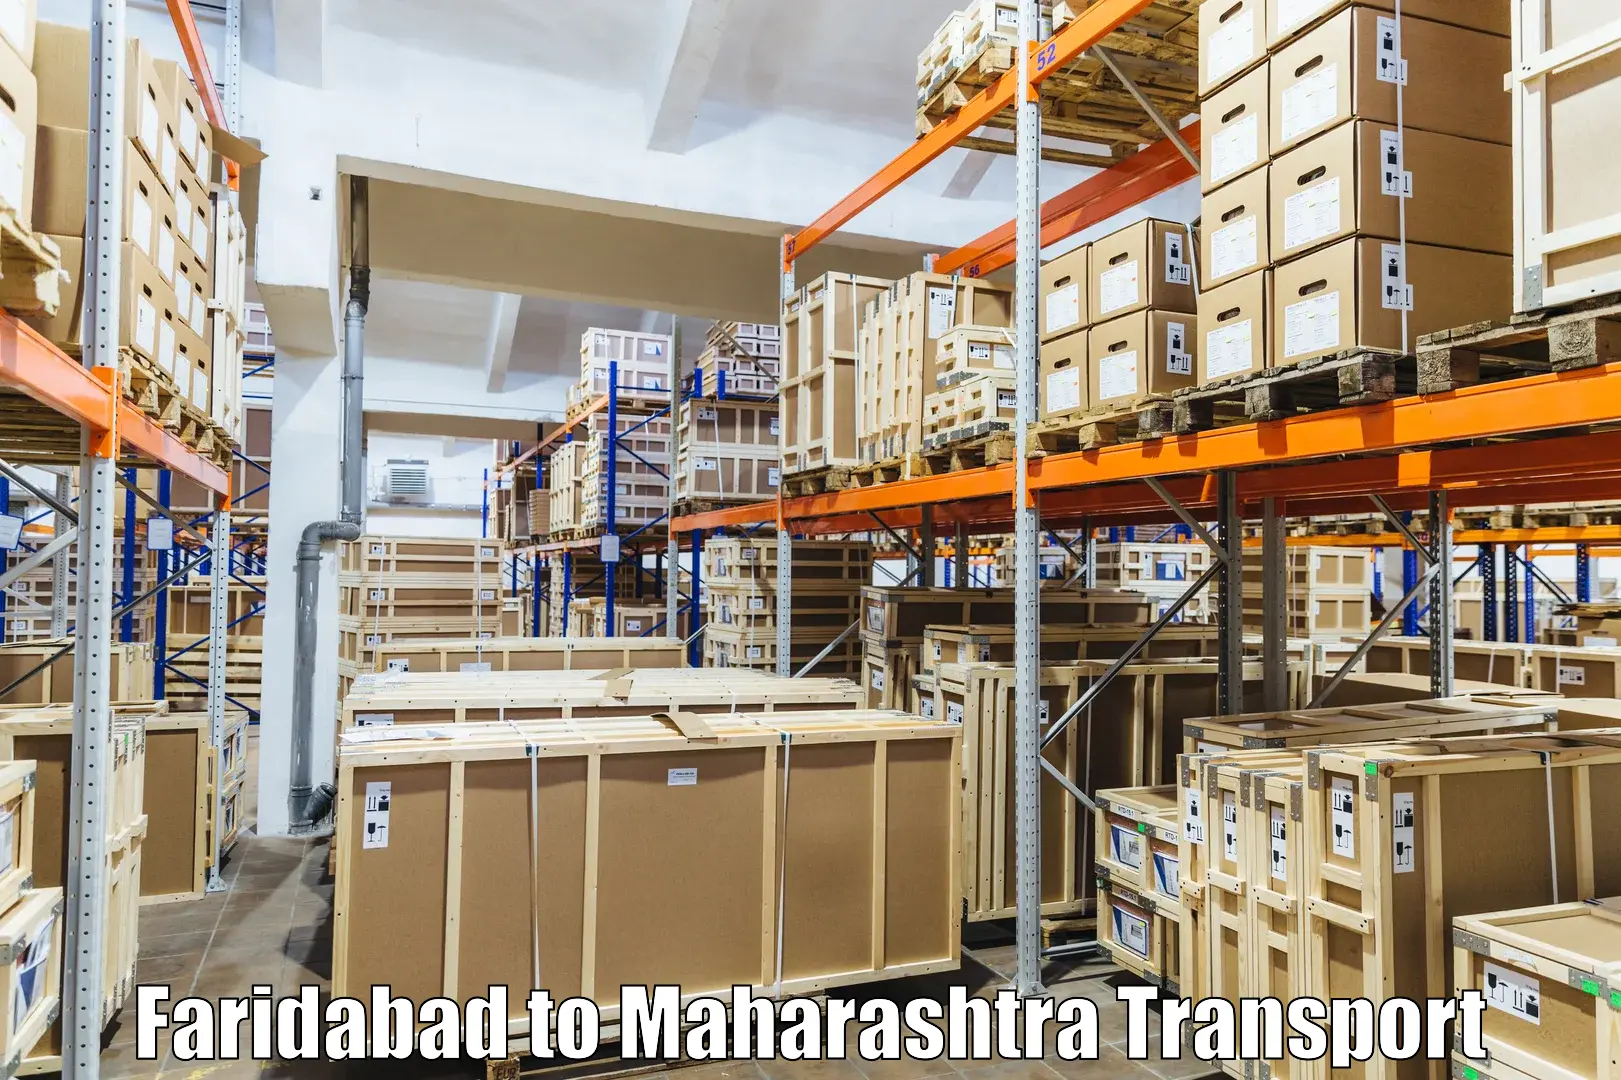 Transport shared services in Faridabad to Vasai